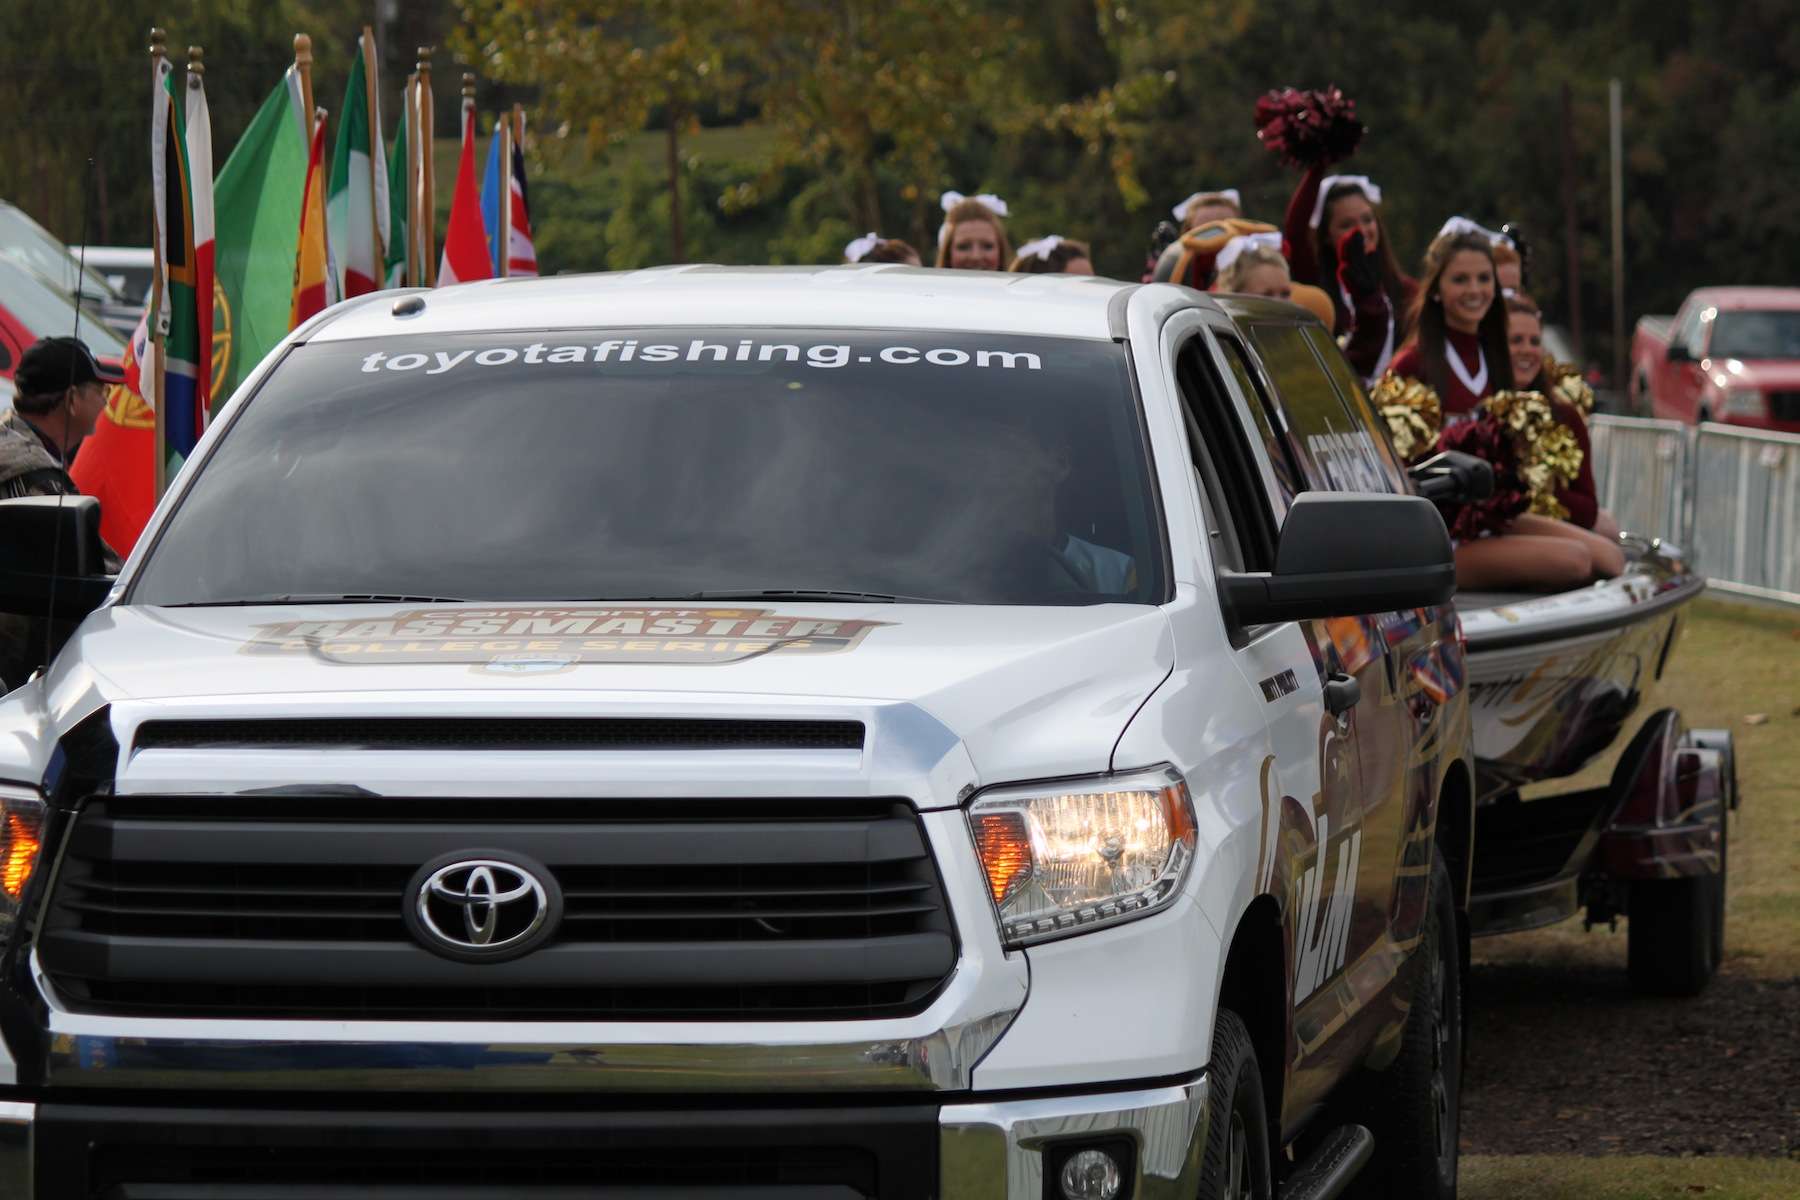 Prior to the final weigh-in, 2015 Carhartt College Series Bassmaster Classic qualifier Brett Preuett was presented with a fully-rigged Toyota Tundra and Nitro Z8. Check back soon for a separate gallery with all the details of that presentation. 